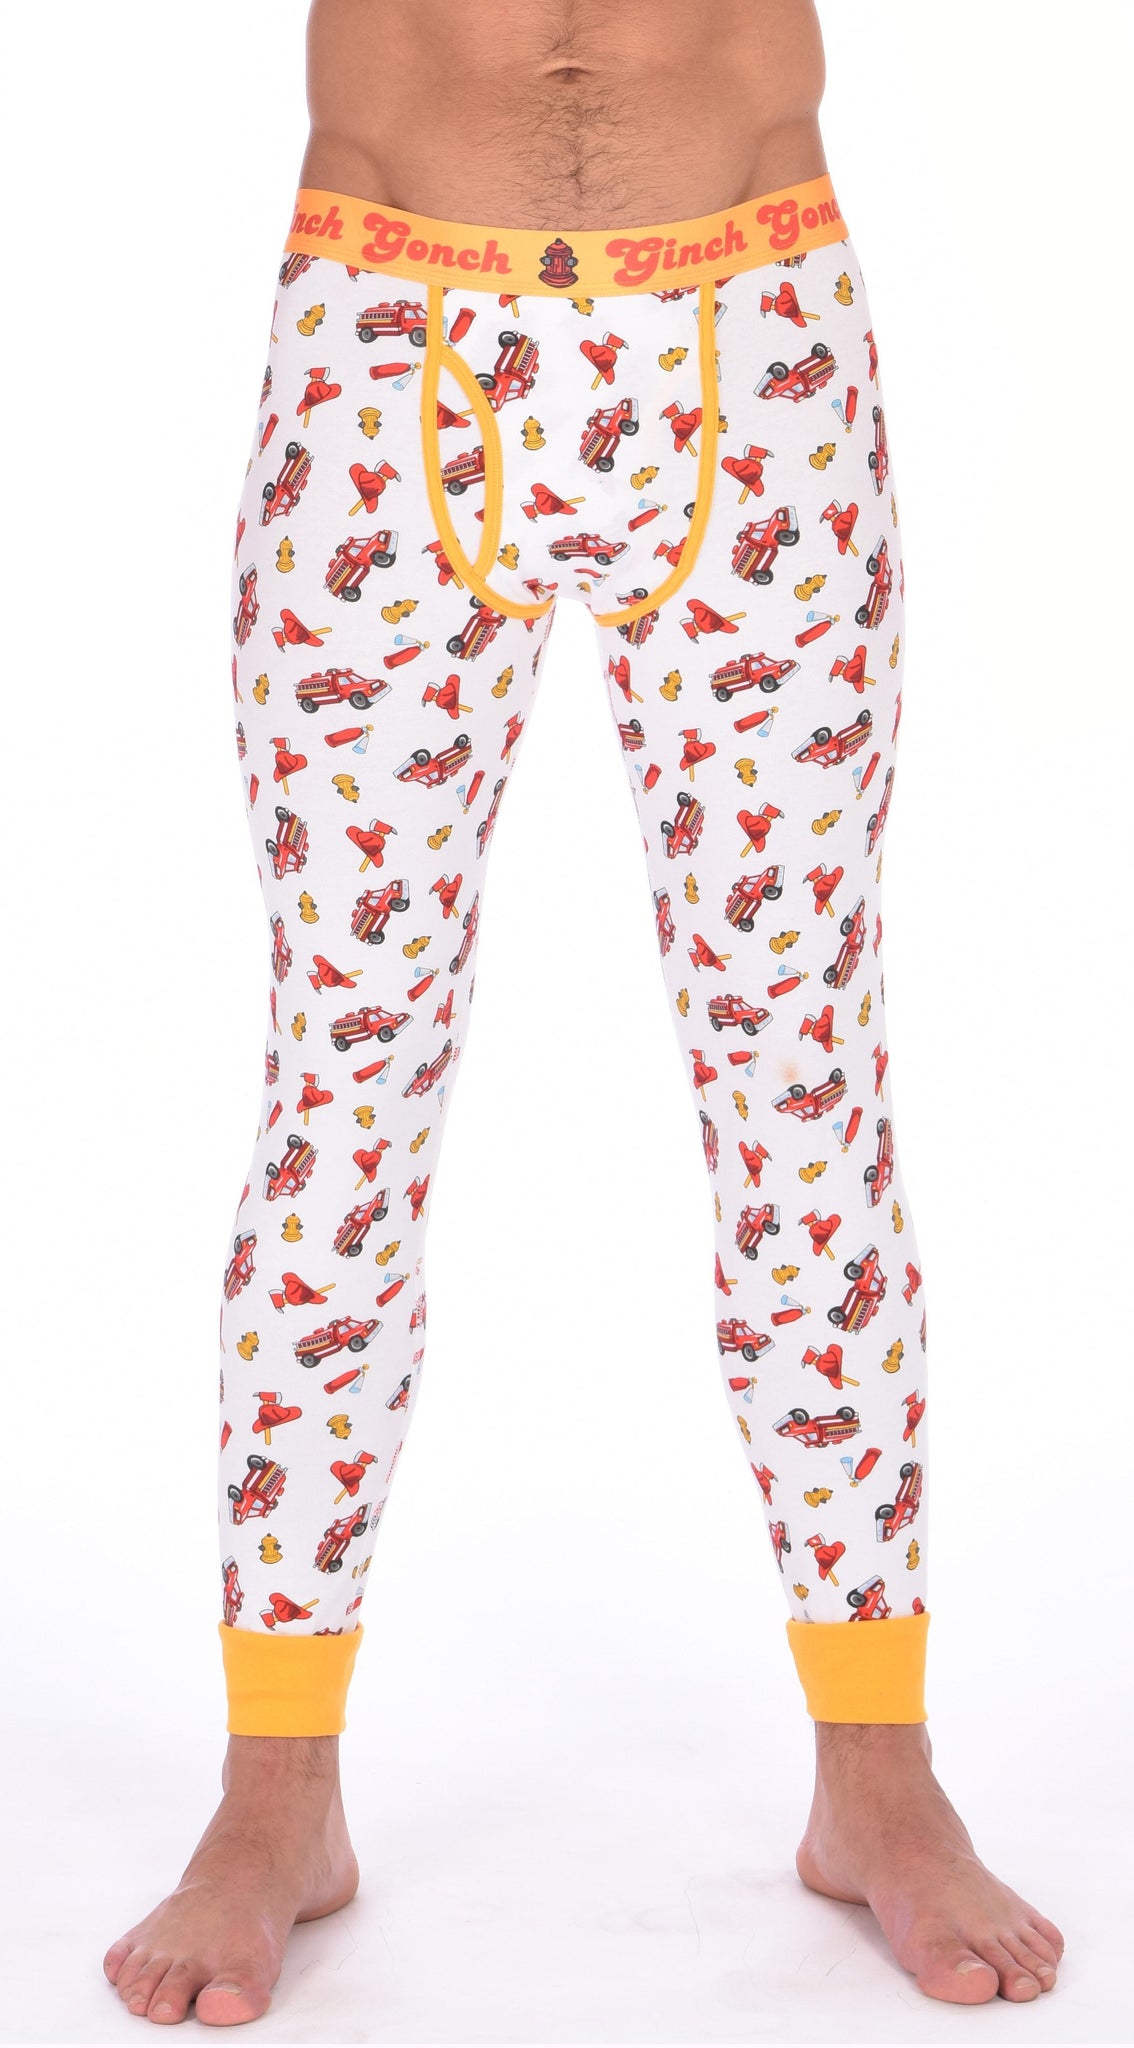 Ginch Gonch GG Fire Fighters long johns leggings mens underwear y front white fabric with fire engines hats and hydrants, yellow trim and yellow printed waistband back